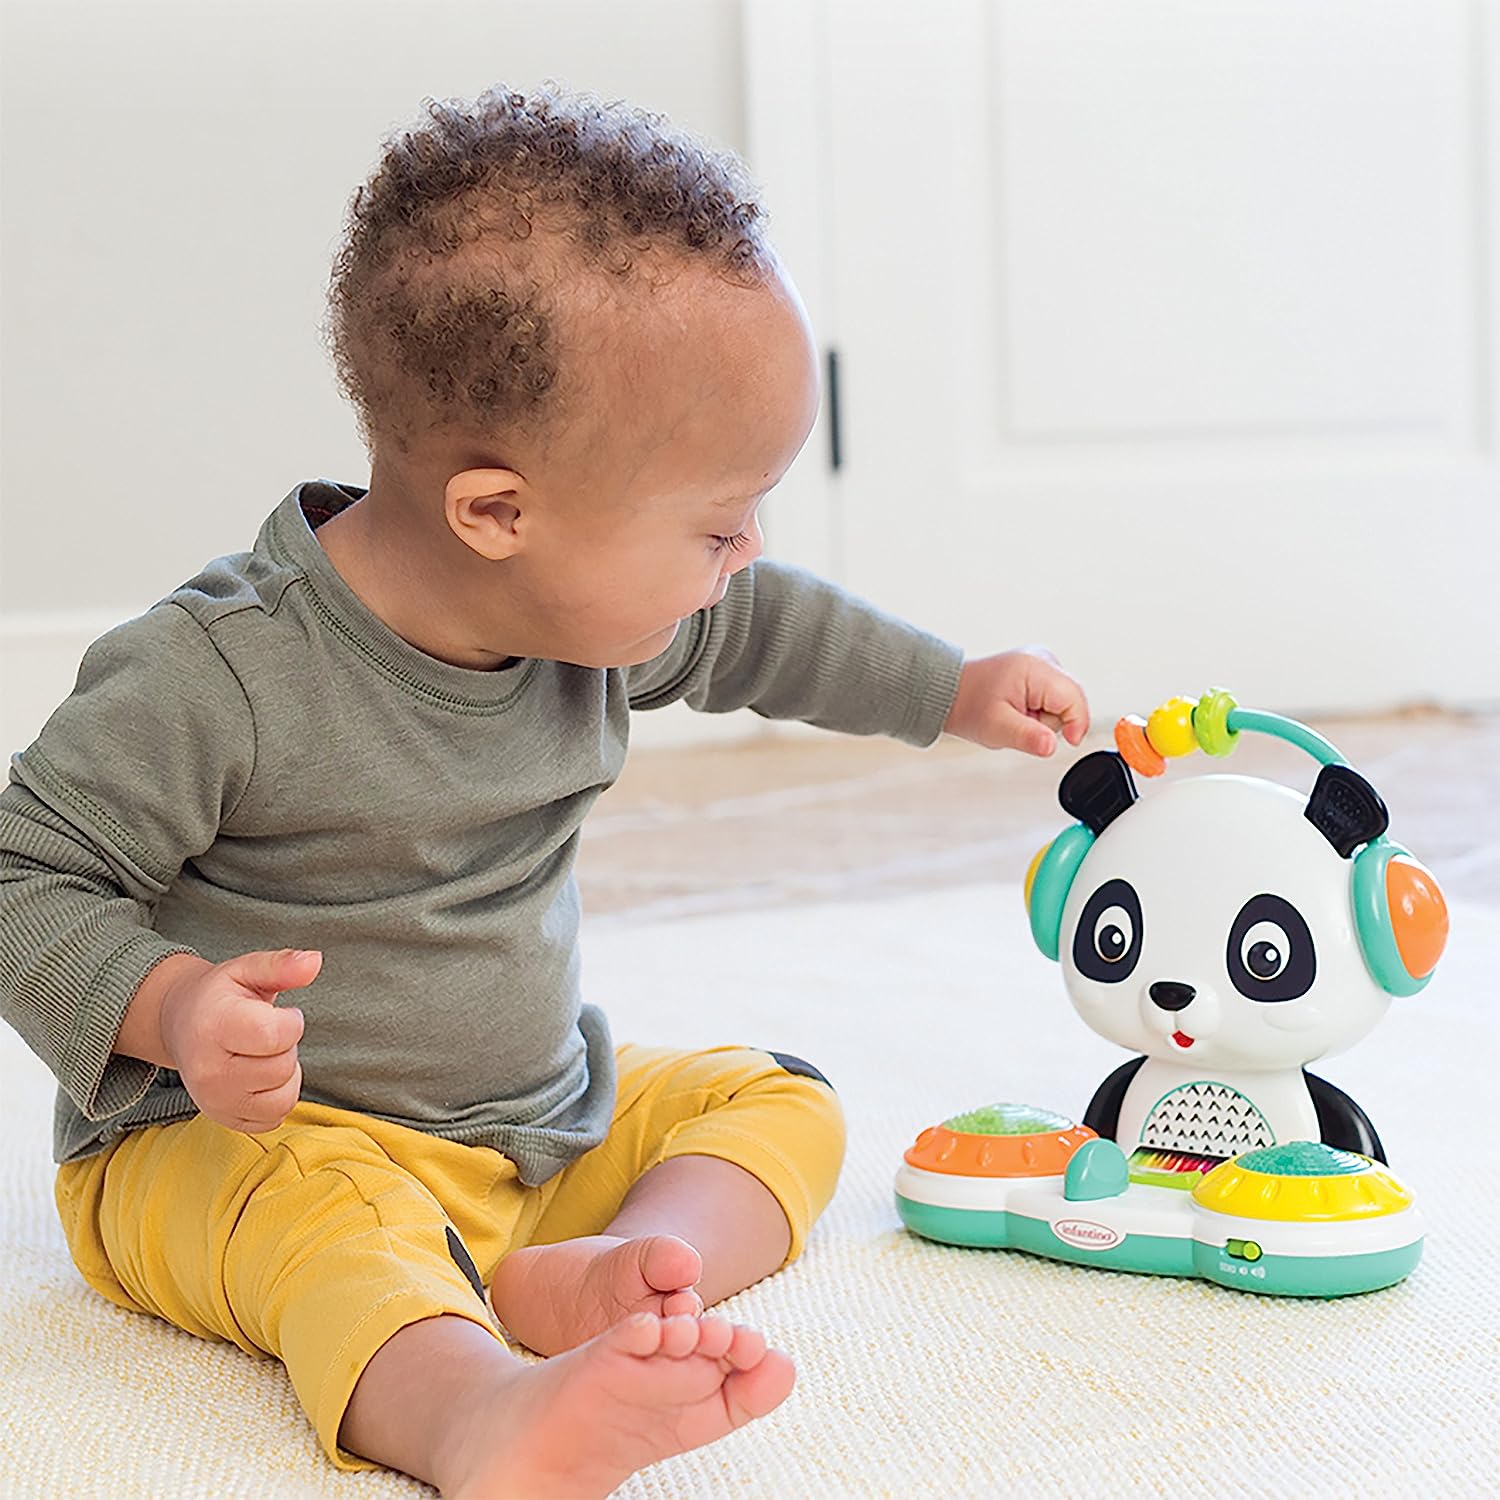 Infantino Spin & Slide DJ Panda - Musical Toy with Busy Beads, Light-up Turntable Drums, Funky Beats.